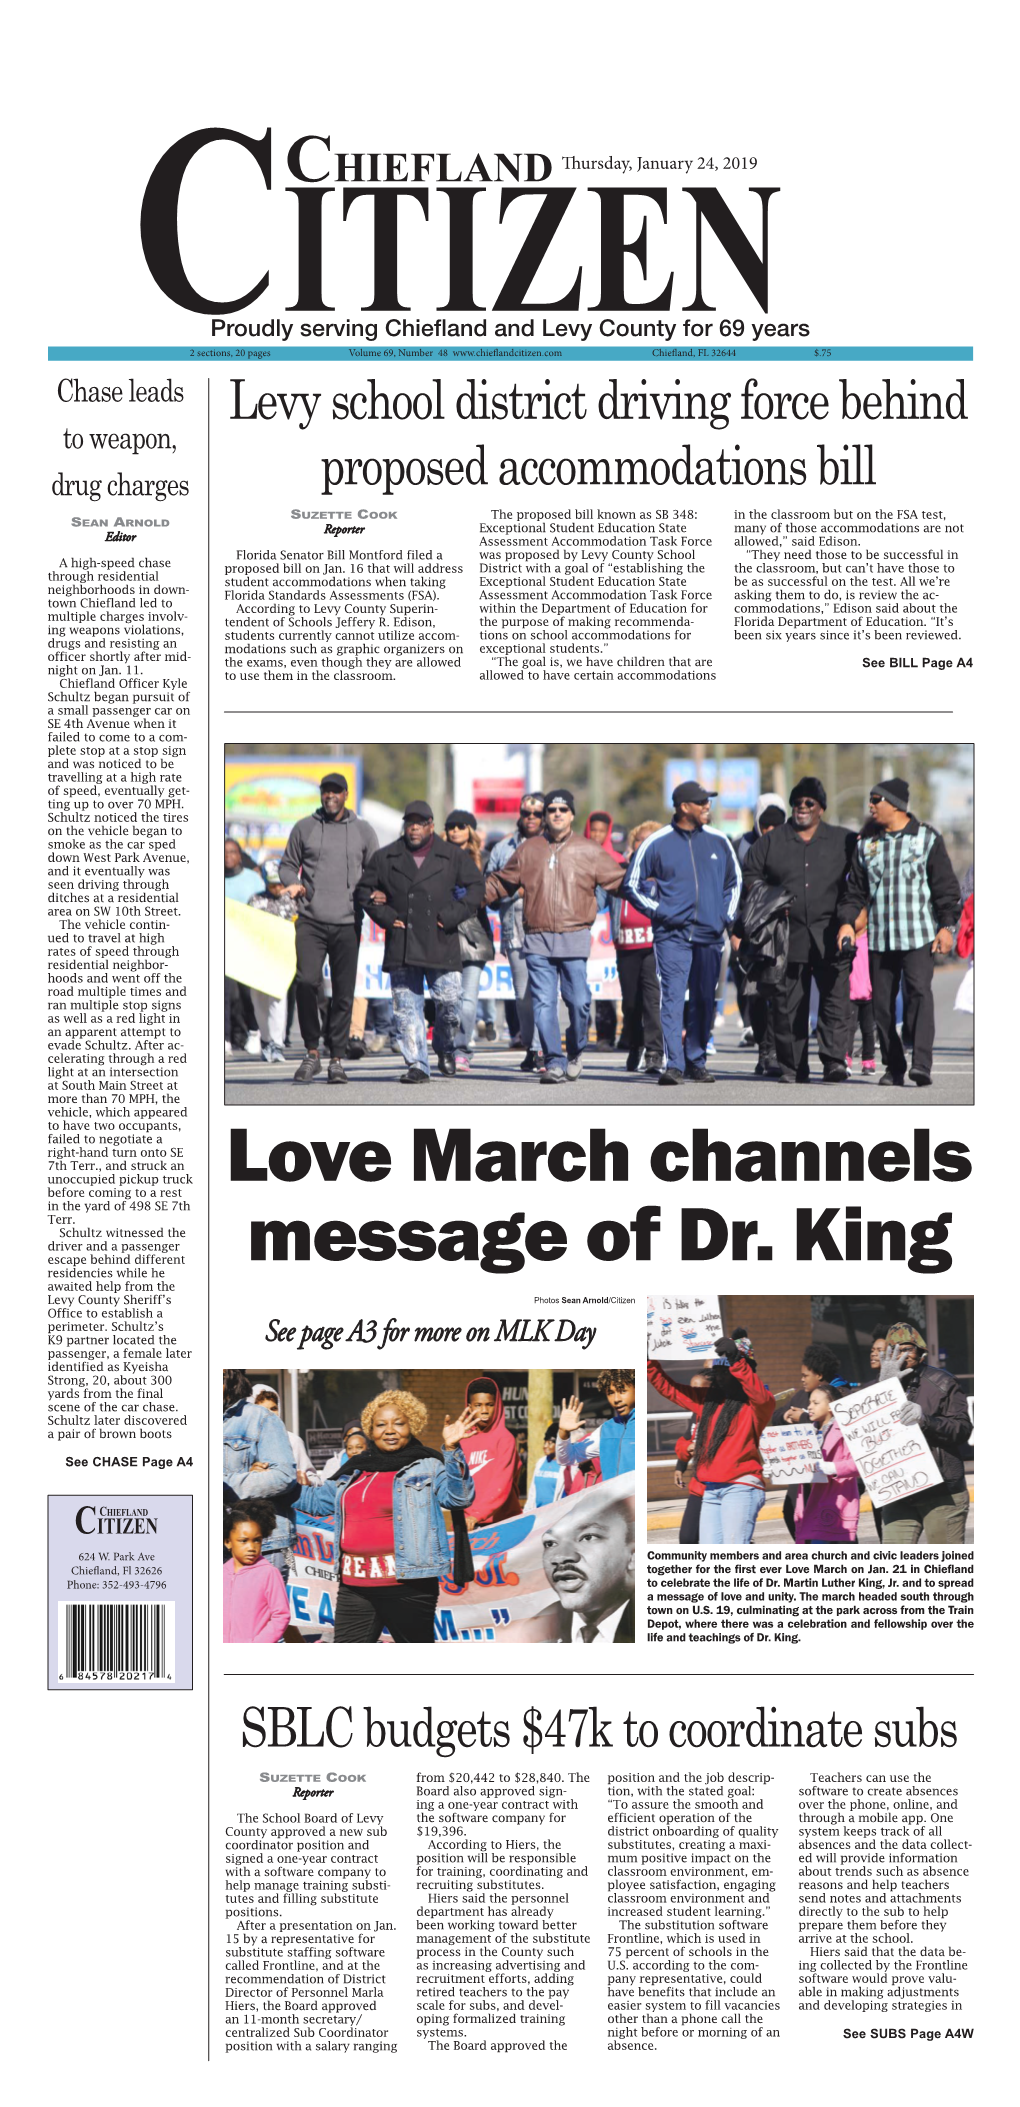 Love March Channels Message of Dr. King